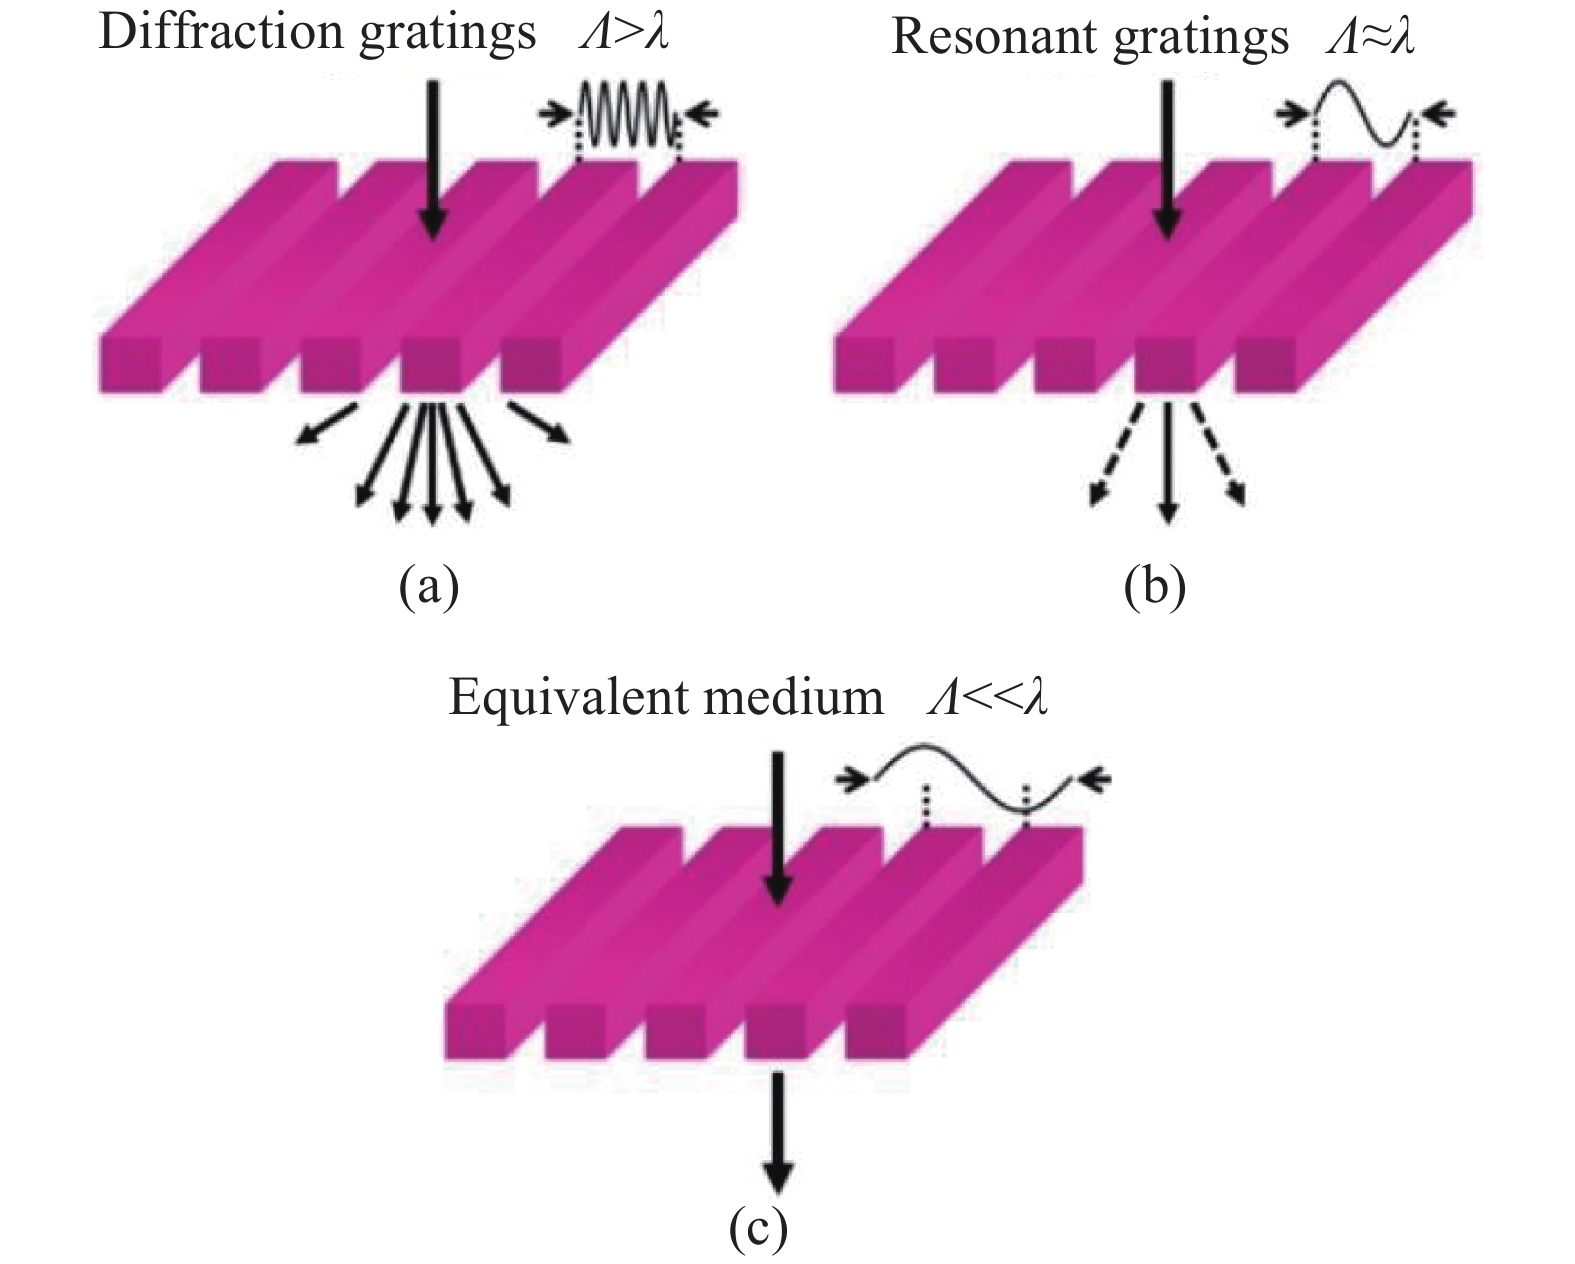 Dielectric grating at different scales. (a) Diffraction gratings; (b) Resonant (subwavelength) gratings; (c) Equivalent dielectric films